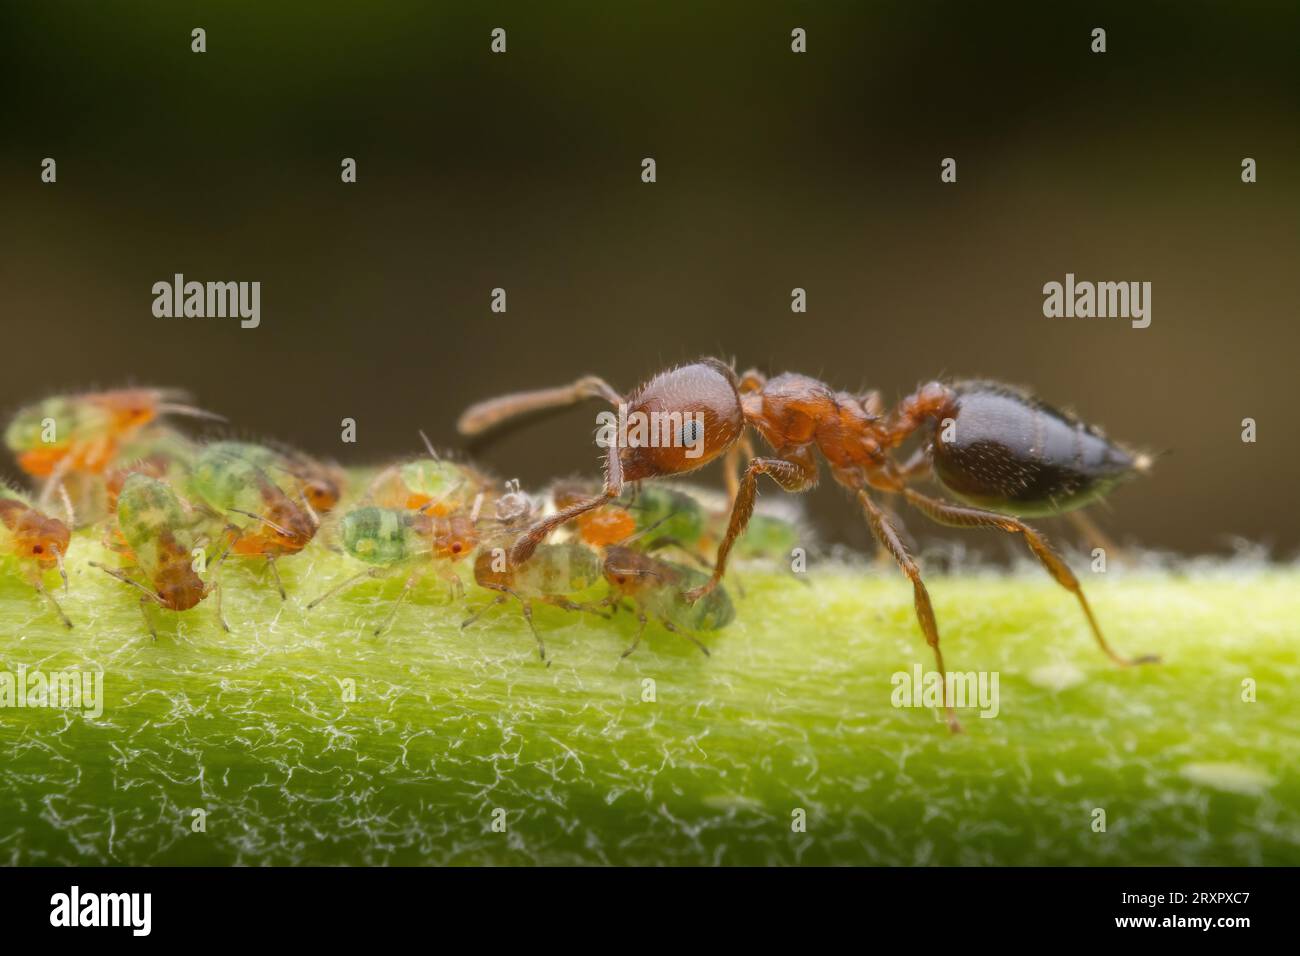 Ants knock on aphids to secrete nectar on leaves Stock Photo